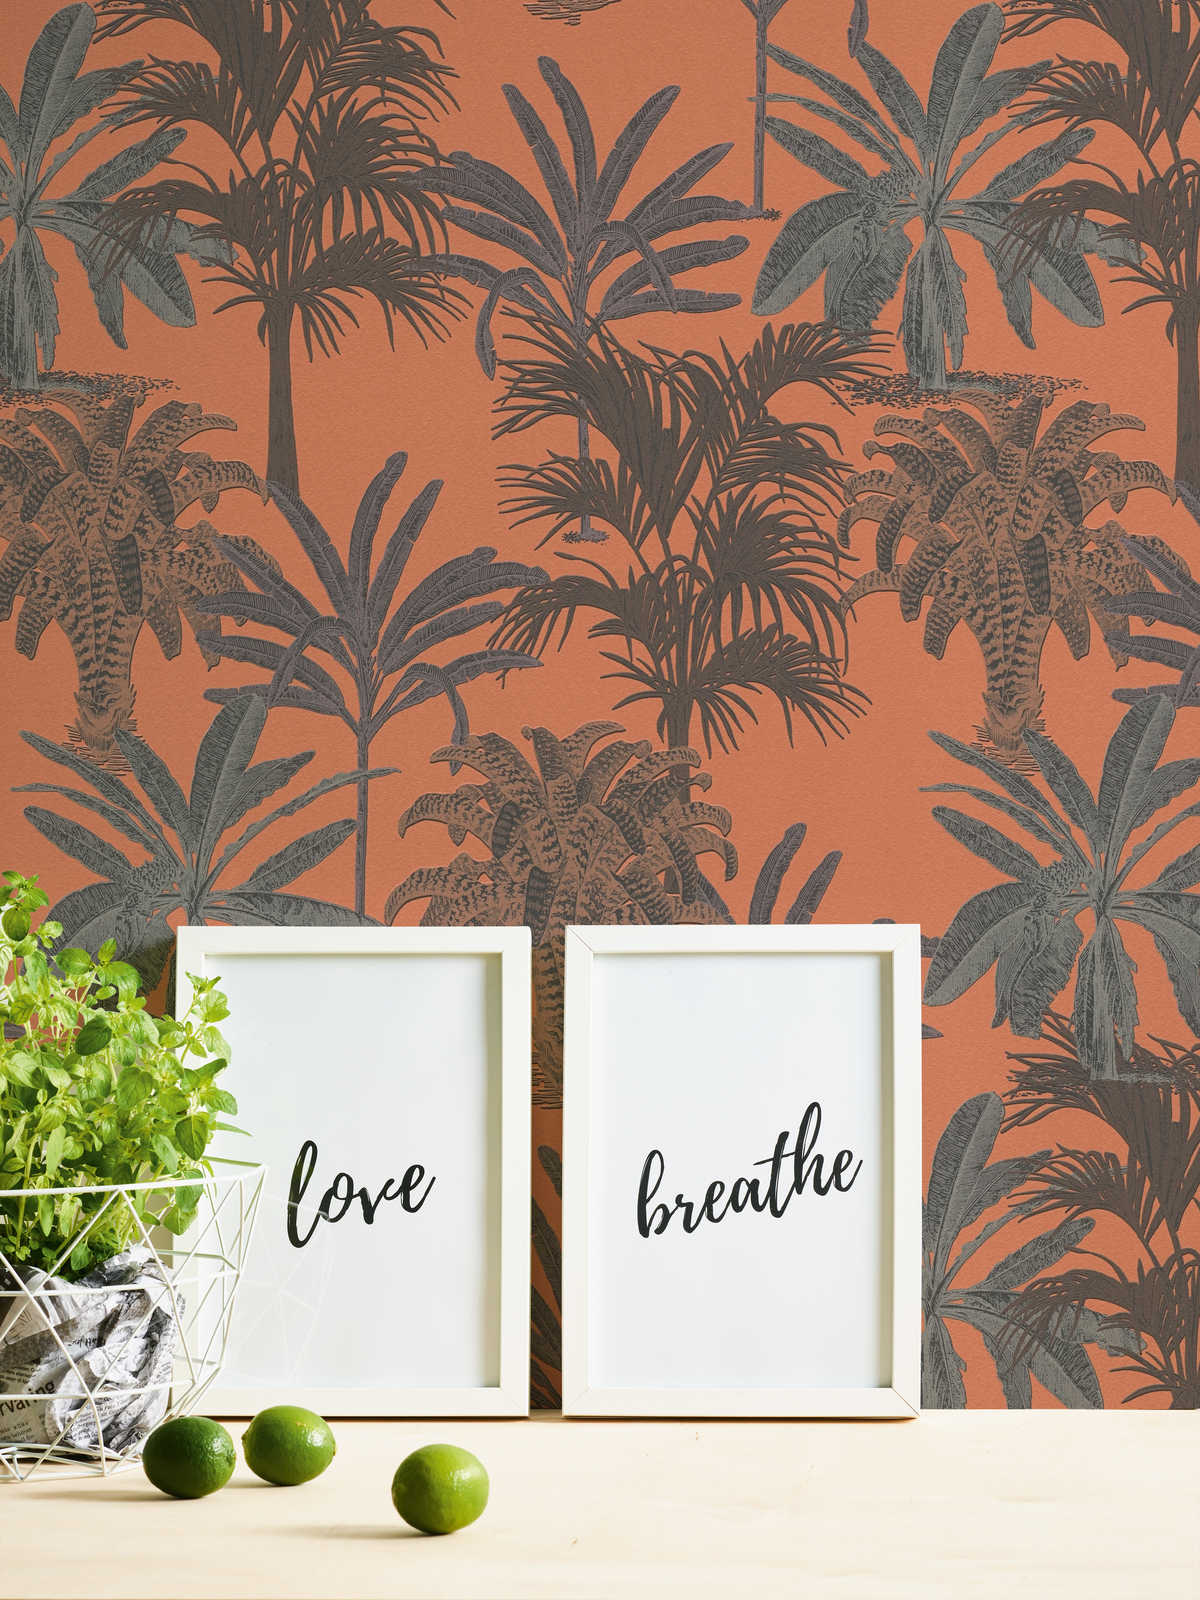             MICHALSKY non-woven wallpaper palm tree pattern colonial style - orange, brown
        